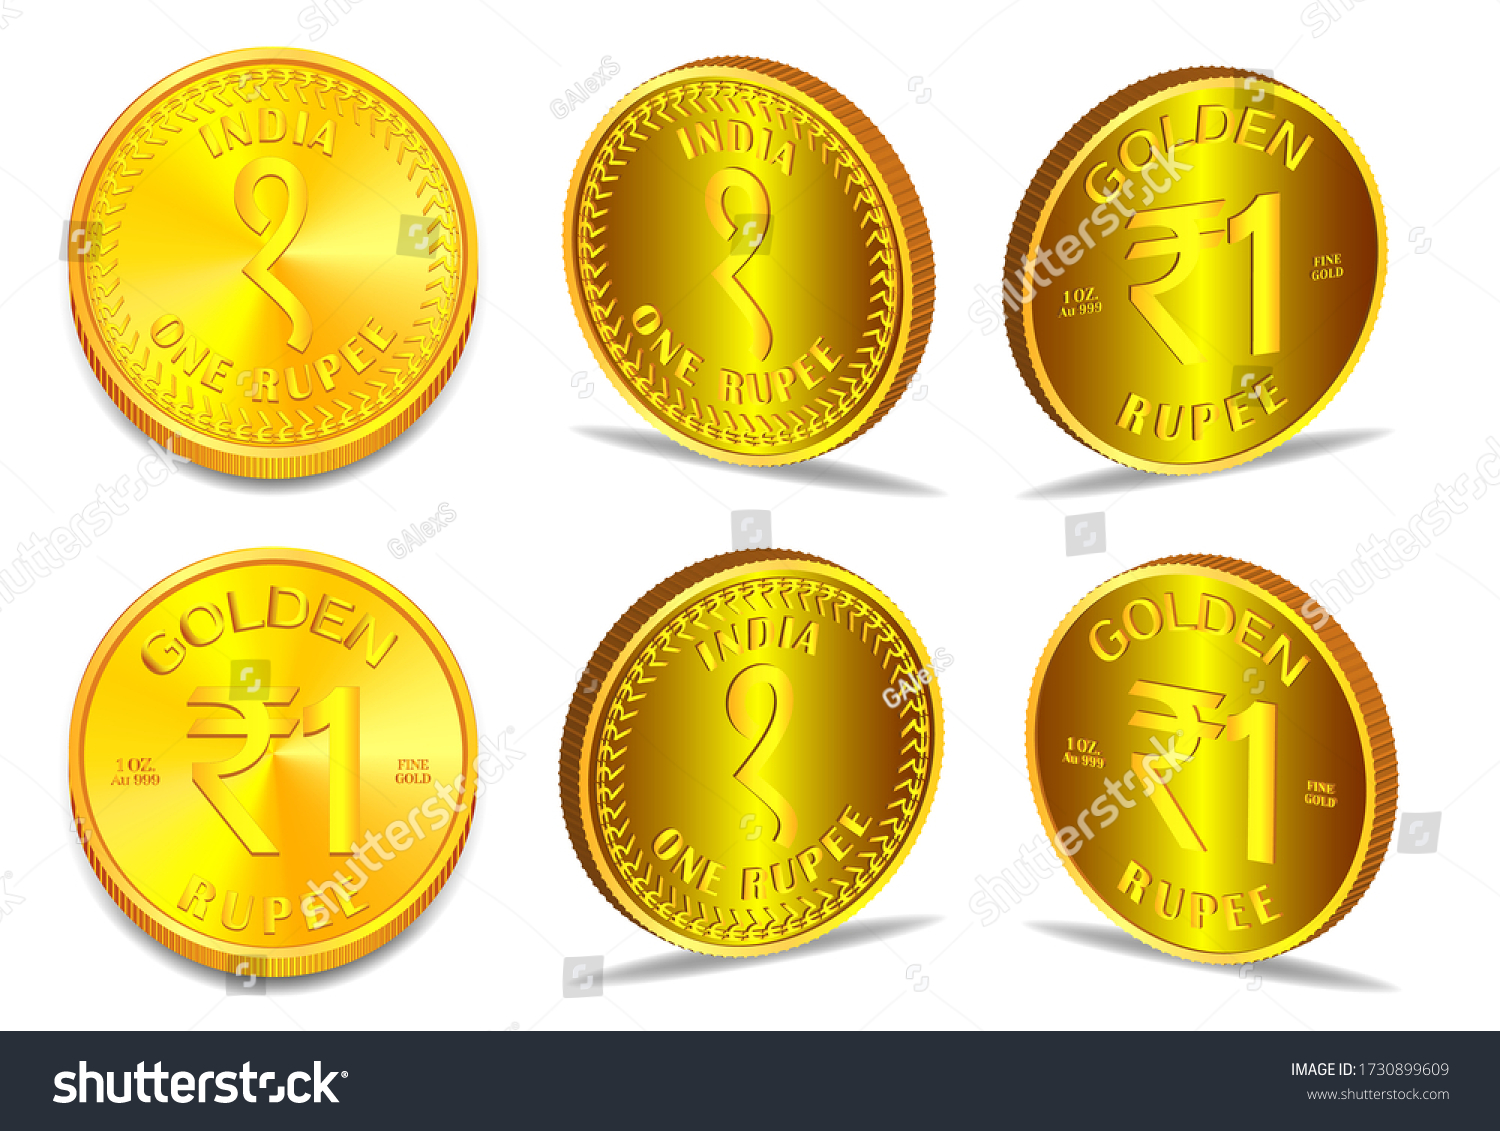 SVG of Coin of India in several 3D projections. Rupee 1 oz. of fine gold EPS10 svg